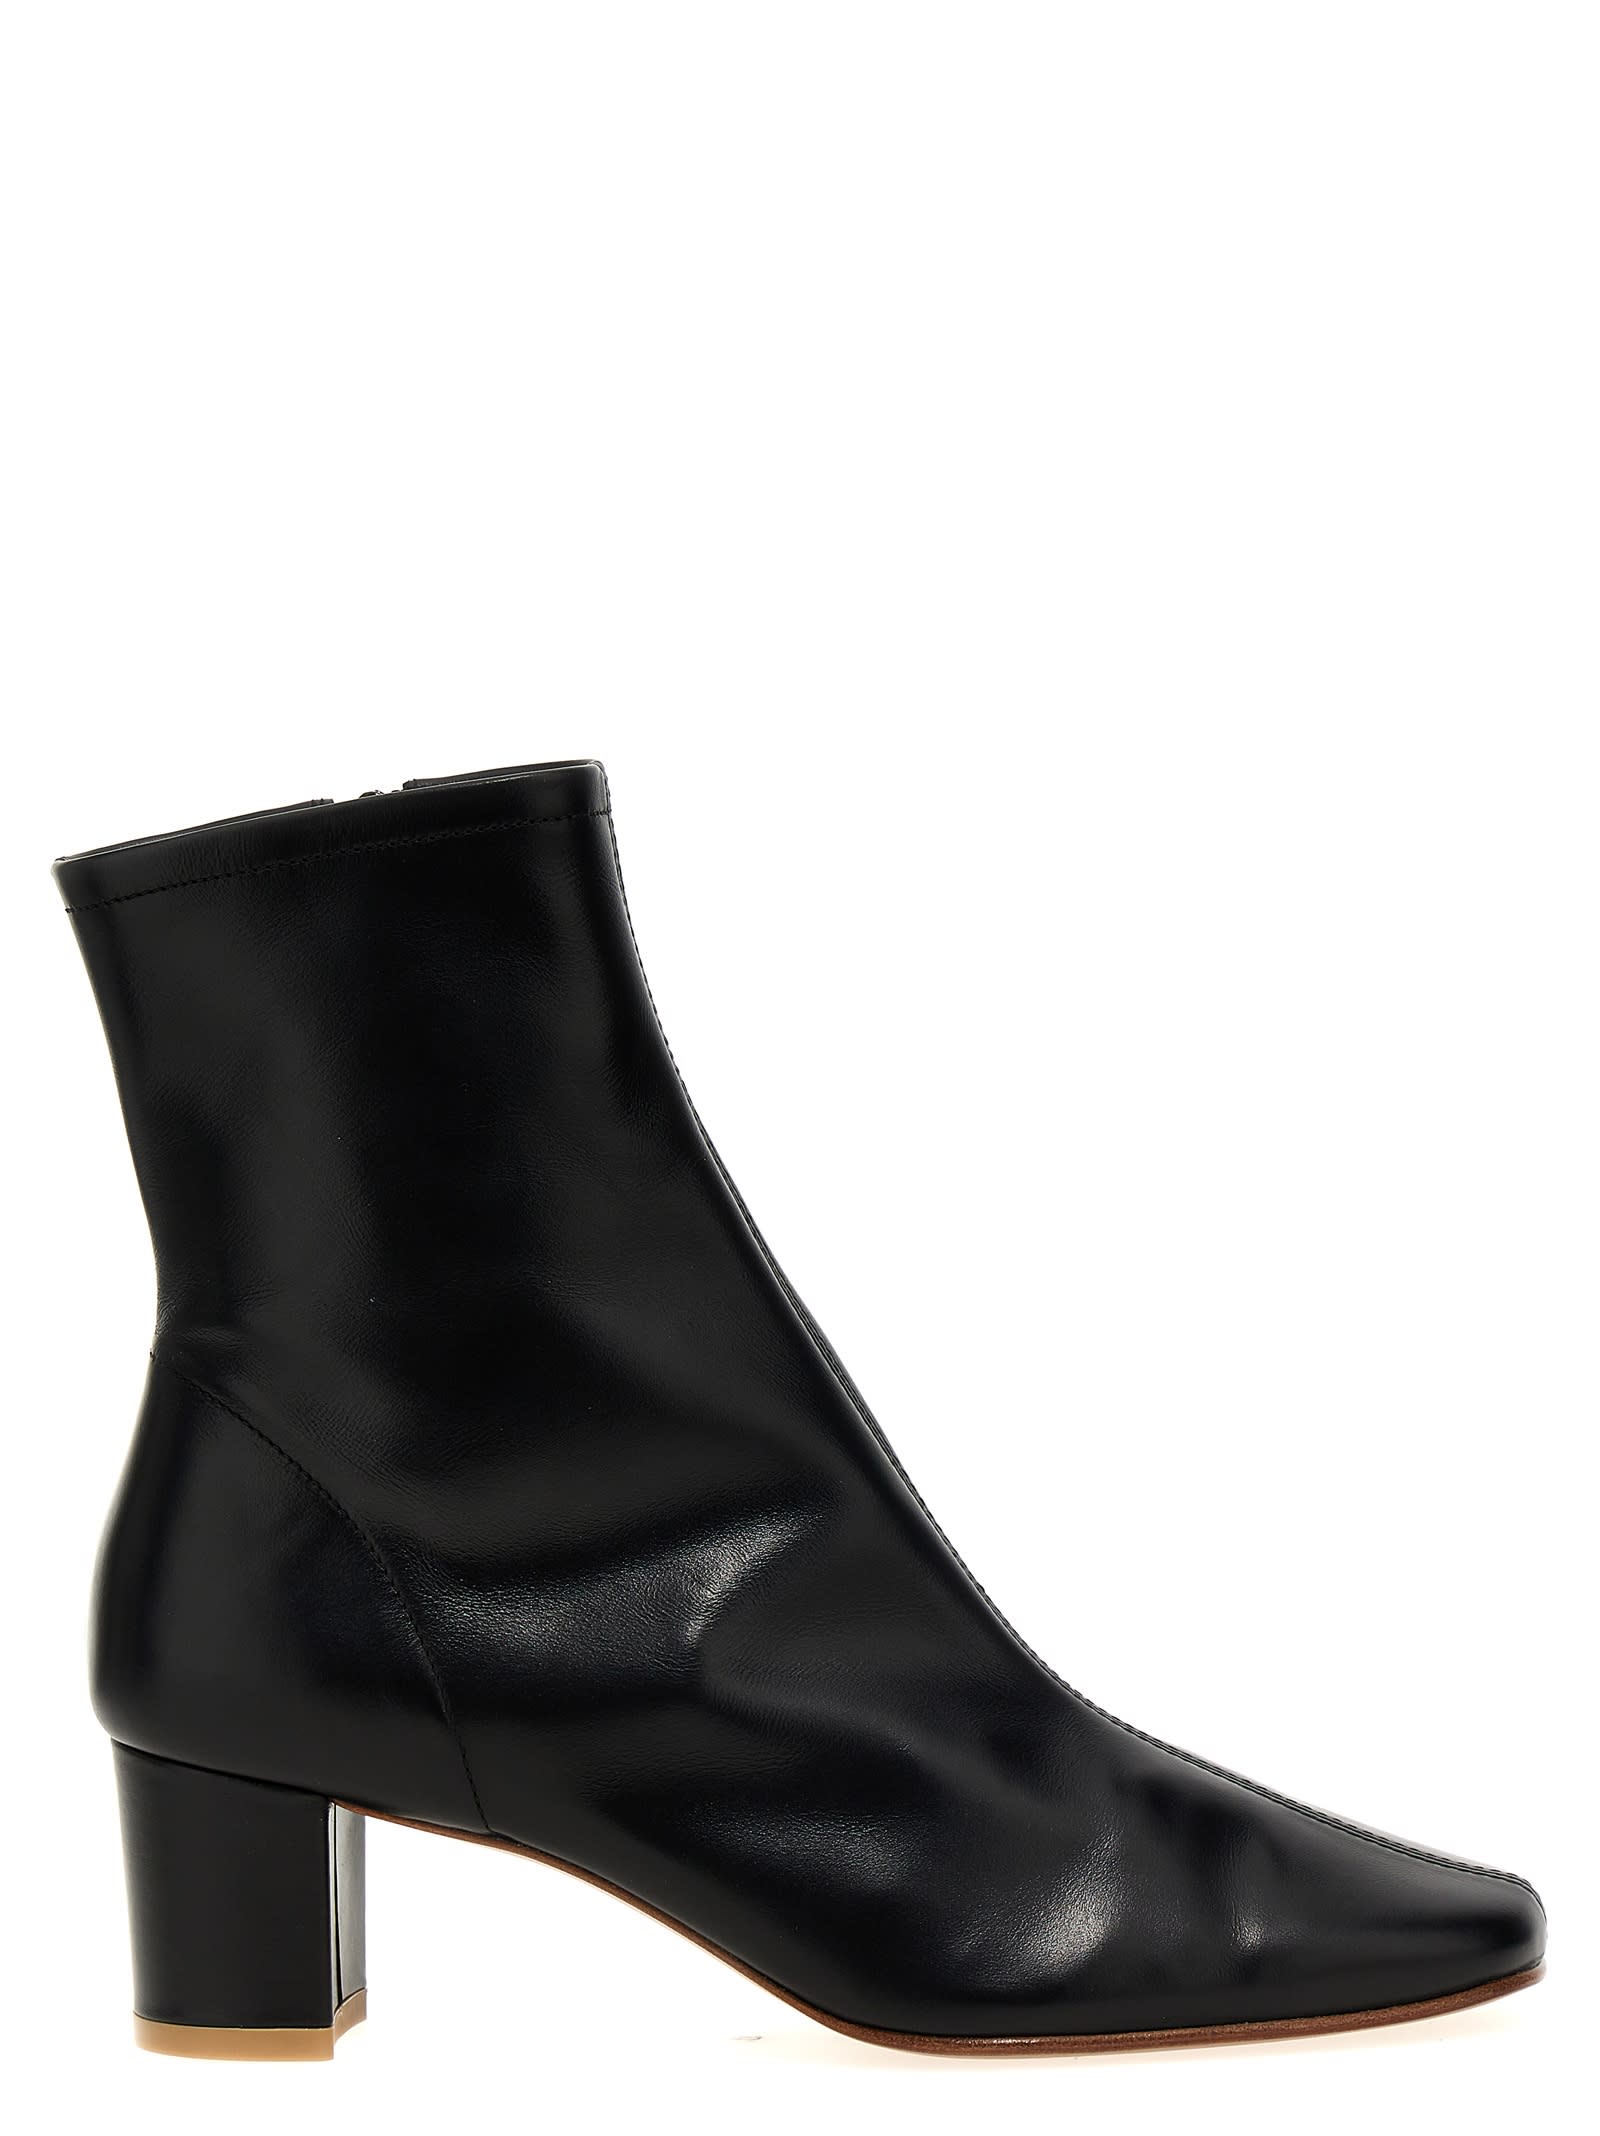 BY FAR sofia Ankle Boots